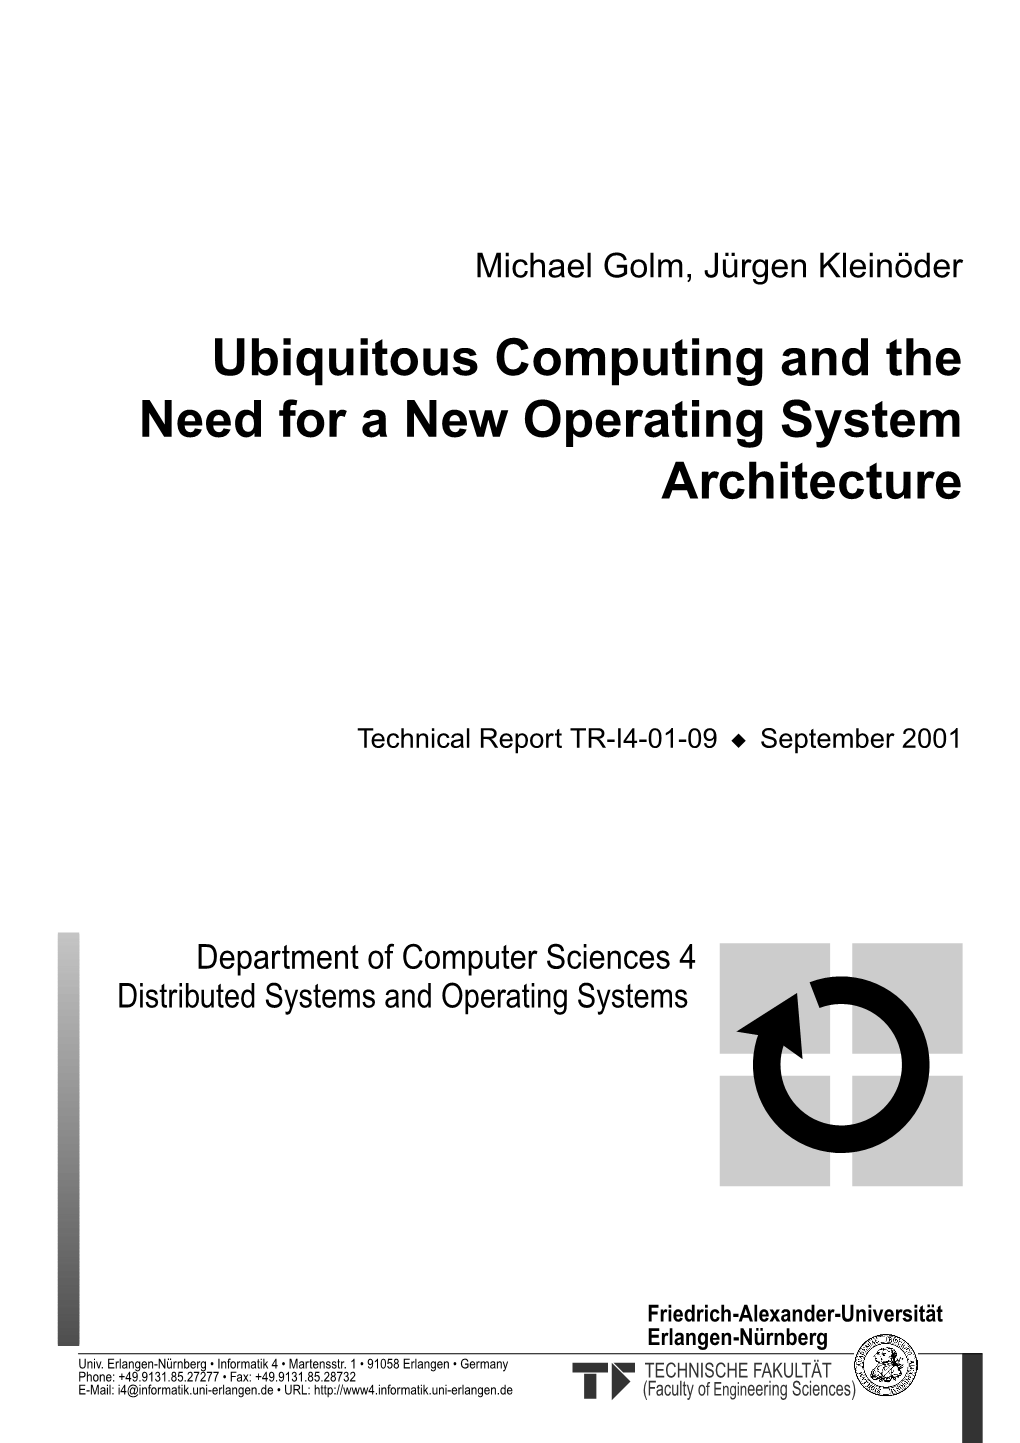 Ubiquitous Computing and the Need for a New Operating System Architecture